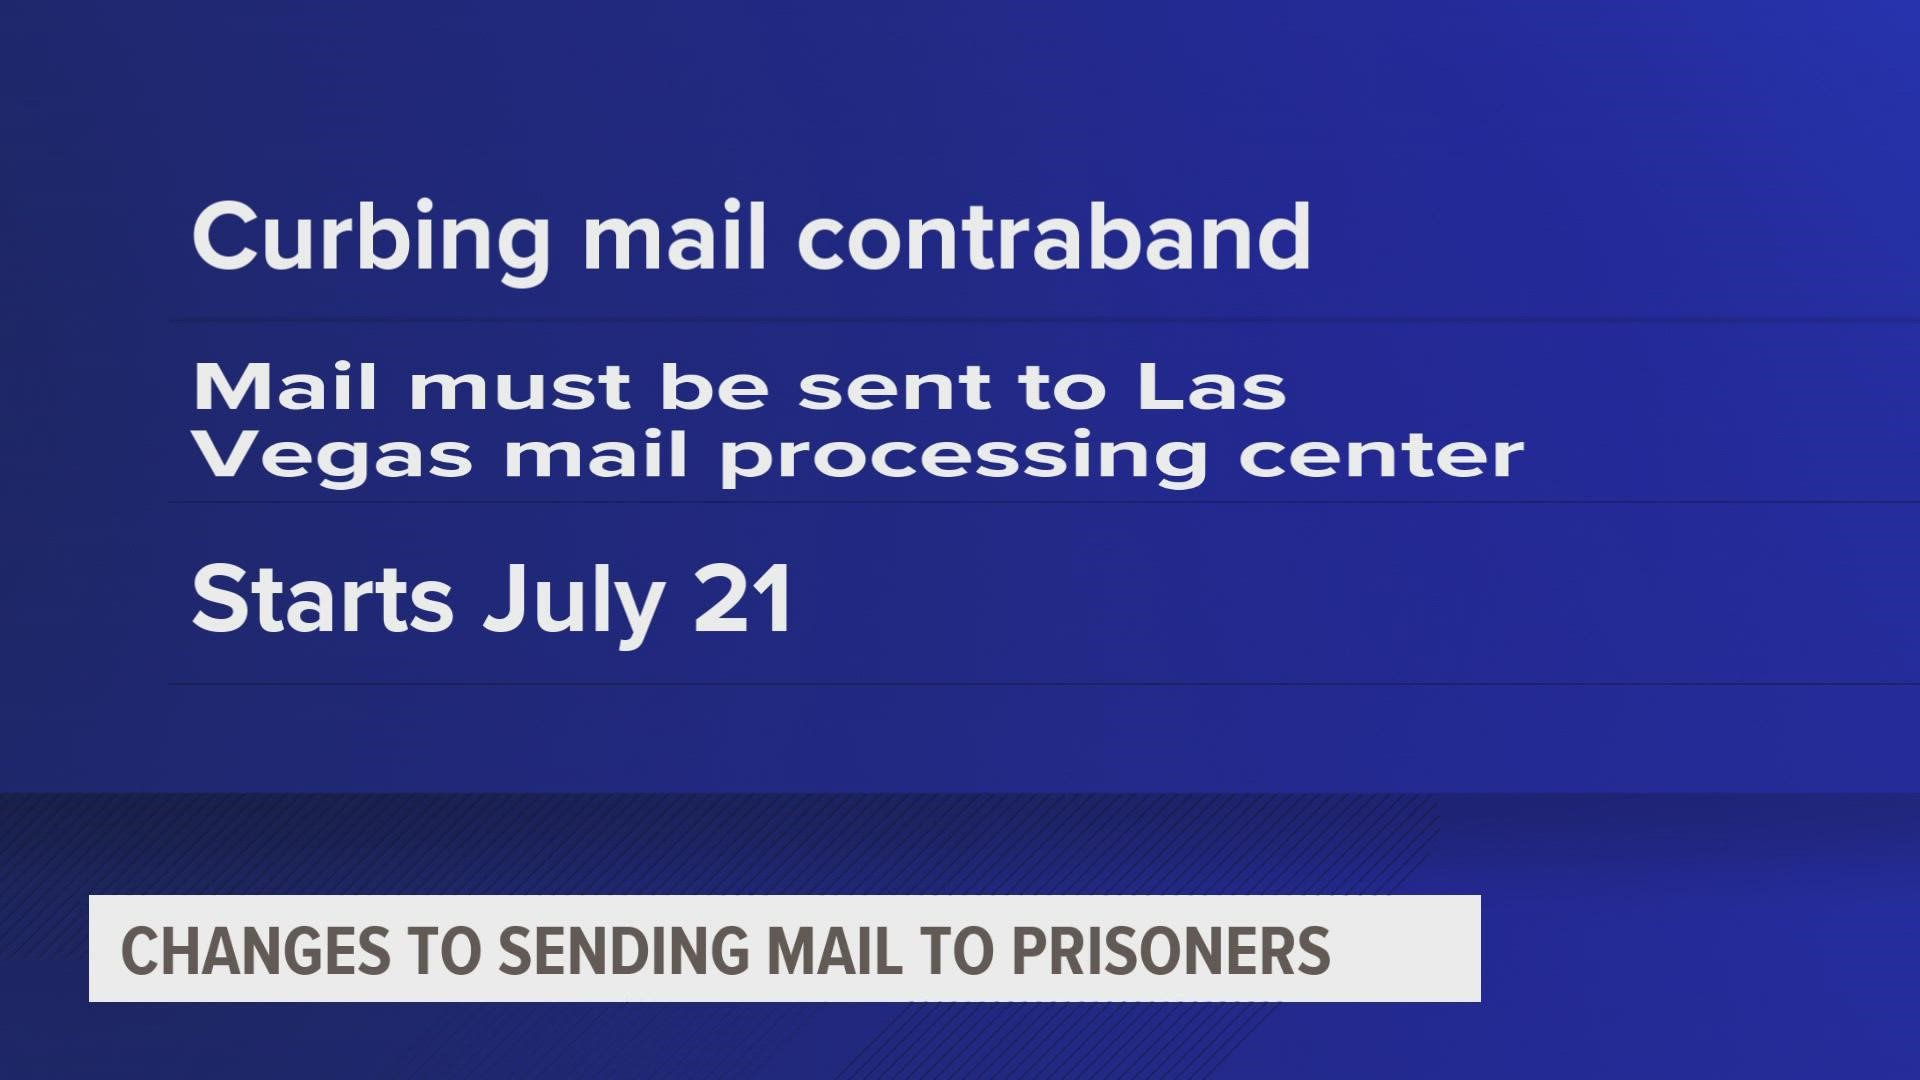 Incoming non-legal mail must be sent to a central mail processing facility in Las Vegas, Nevada, beginning July 21, says IDOC.